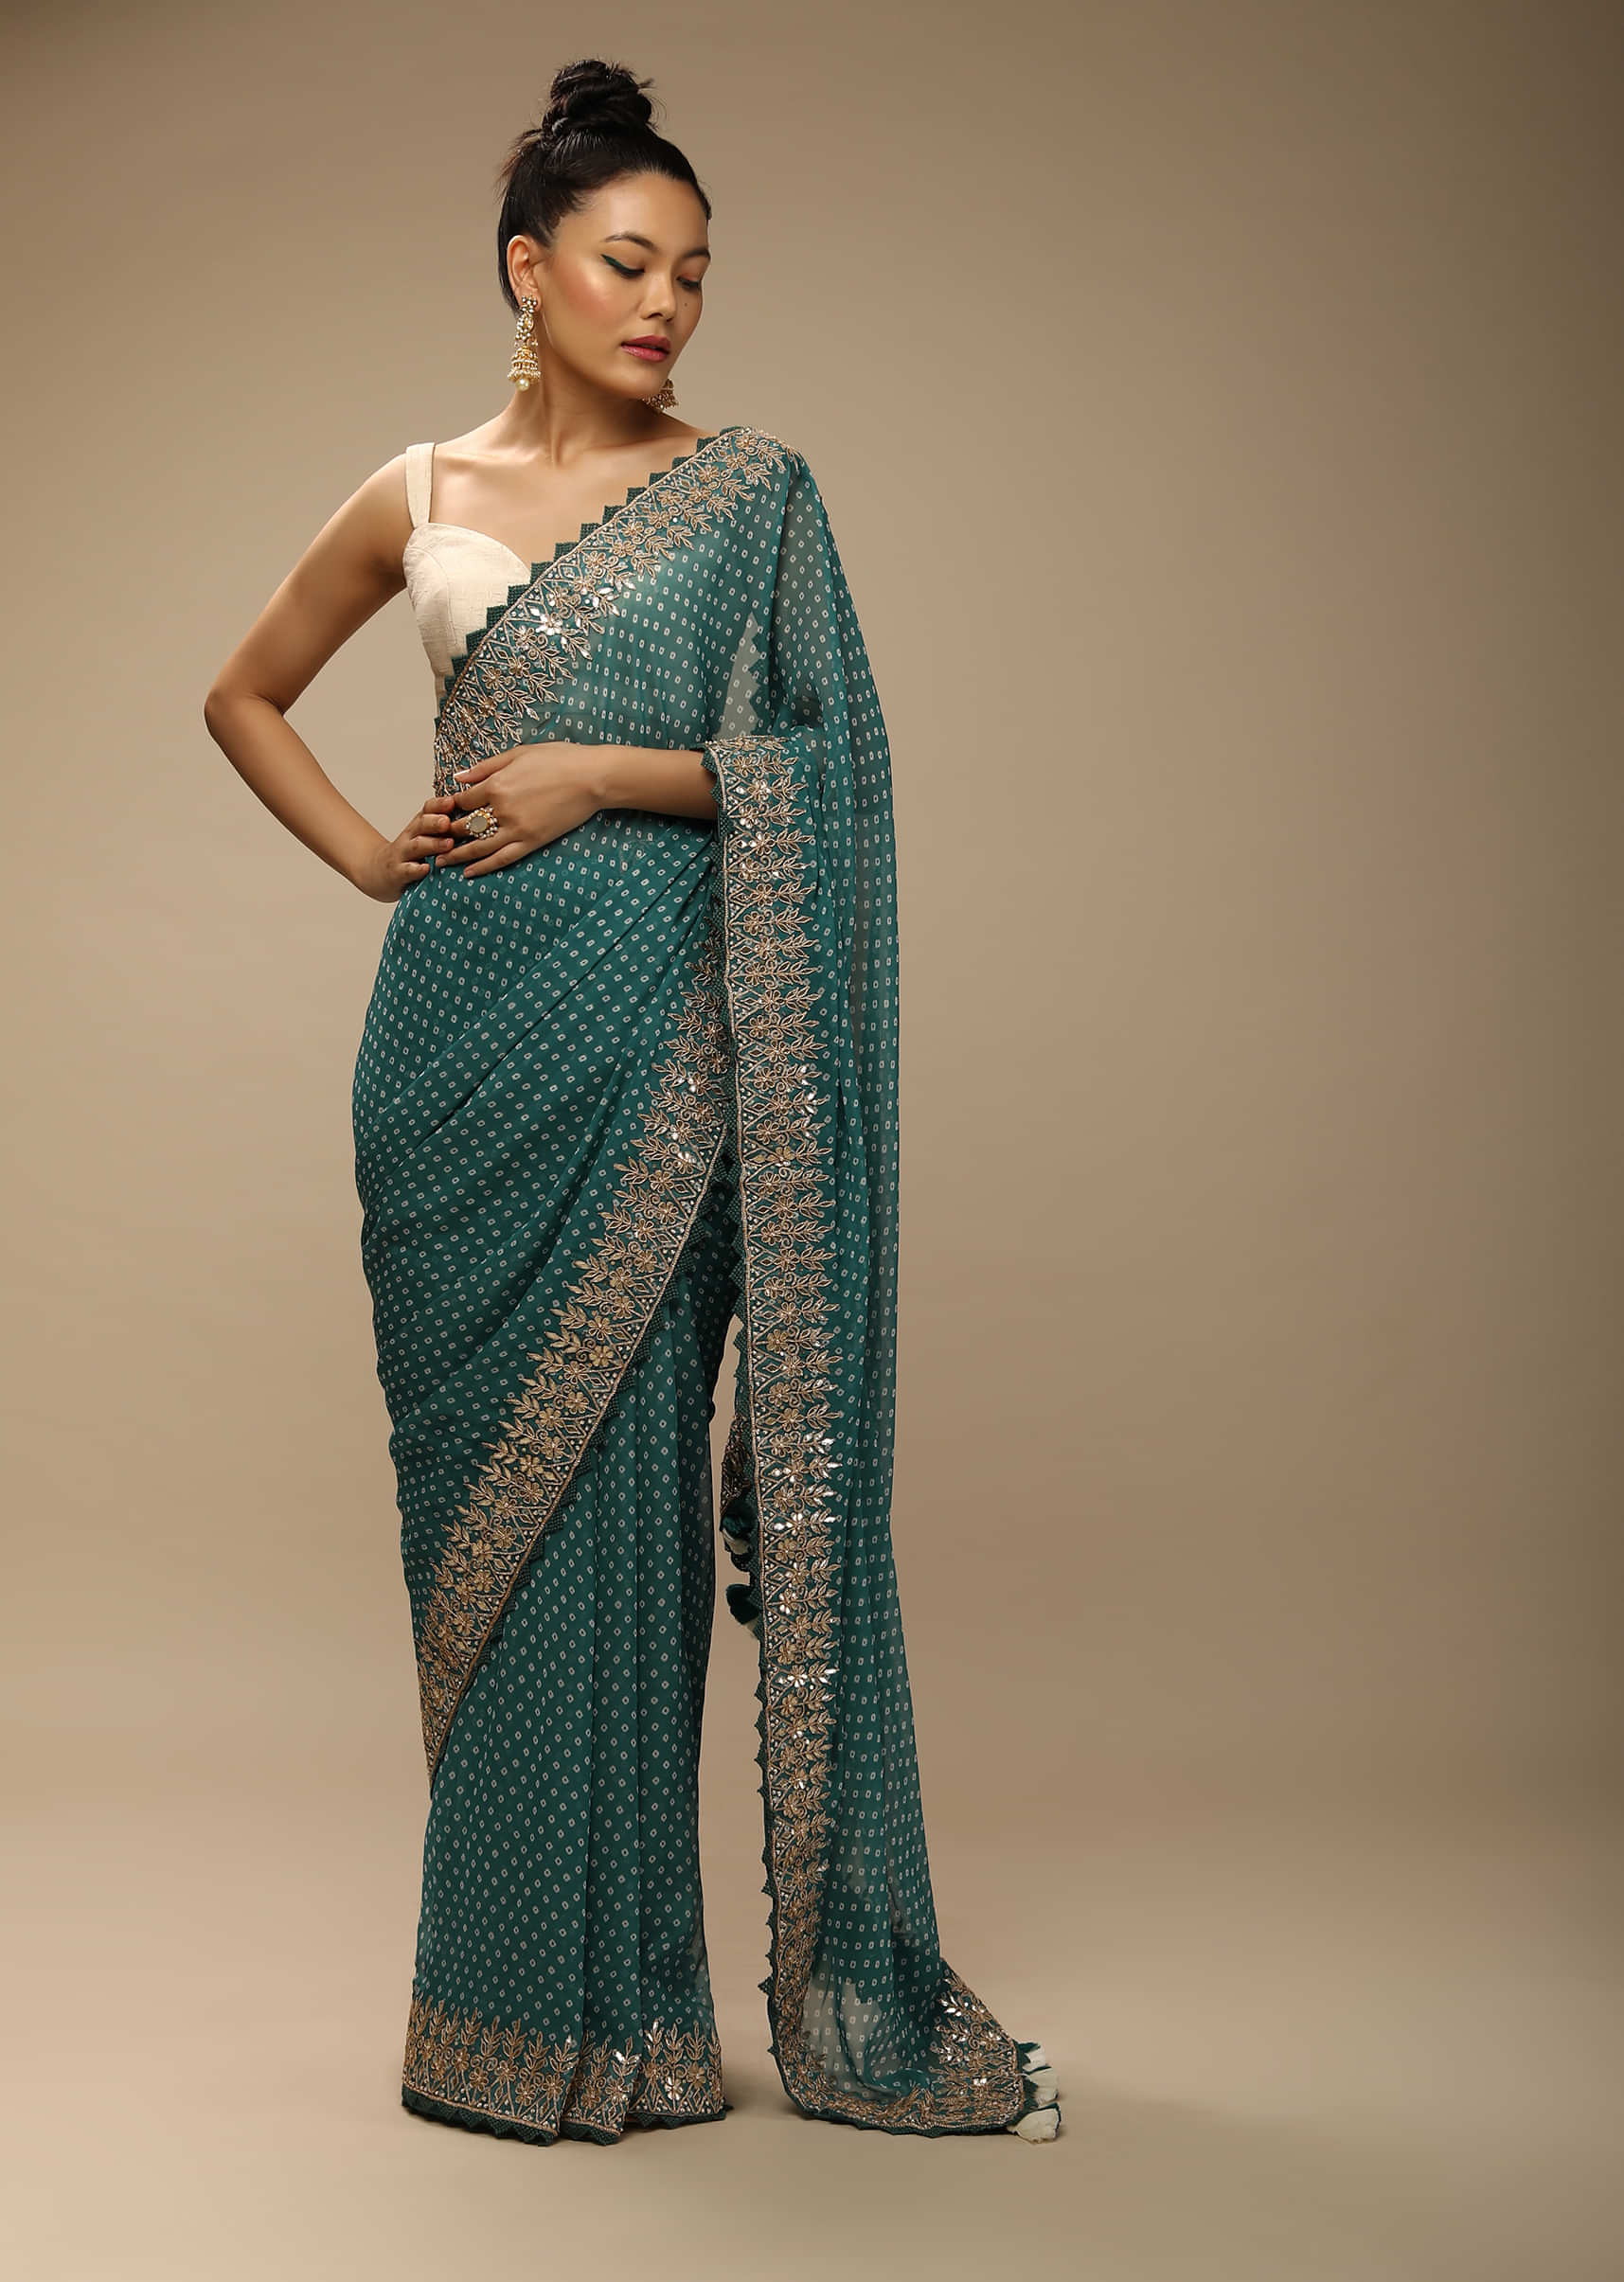 Teal Green Bandhani Saree In Georgette With Gotta Patti Embroidered Floral Border